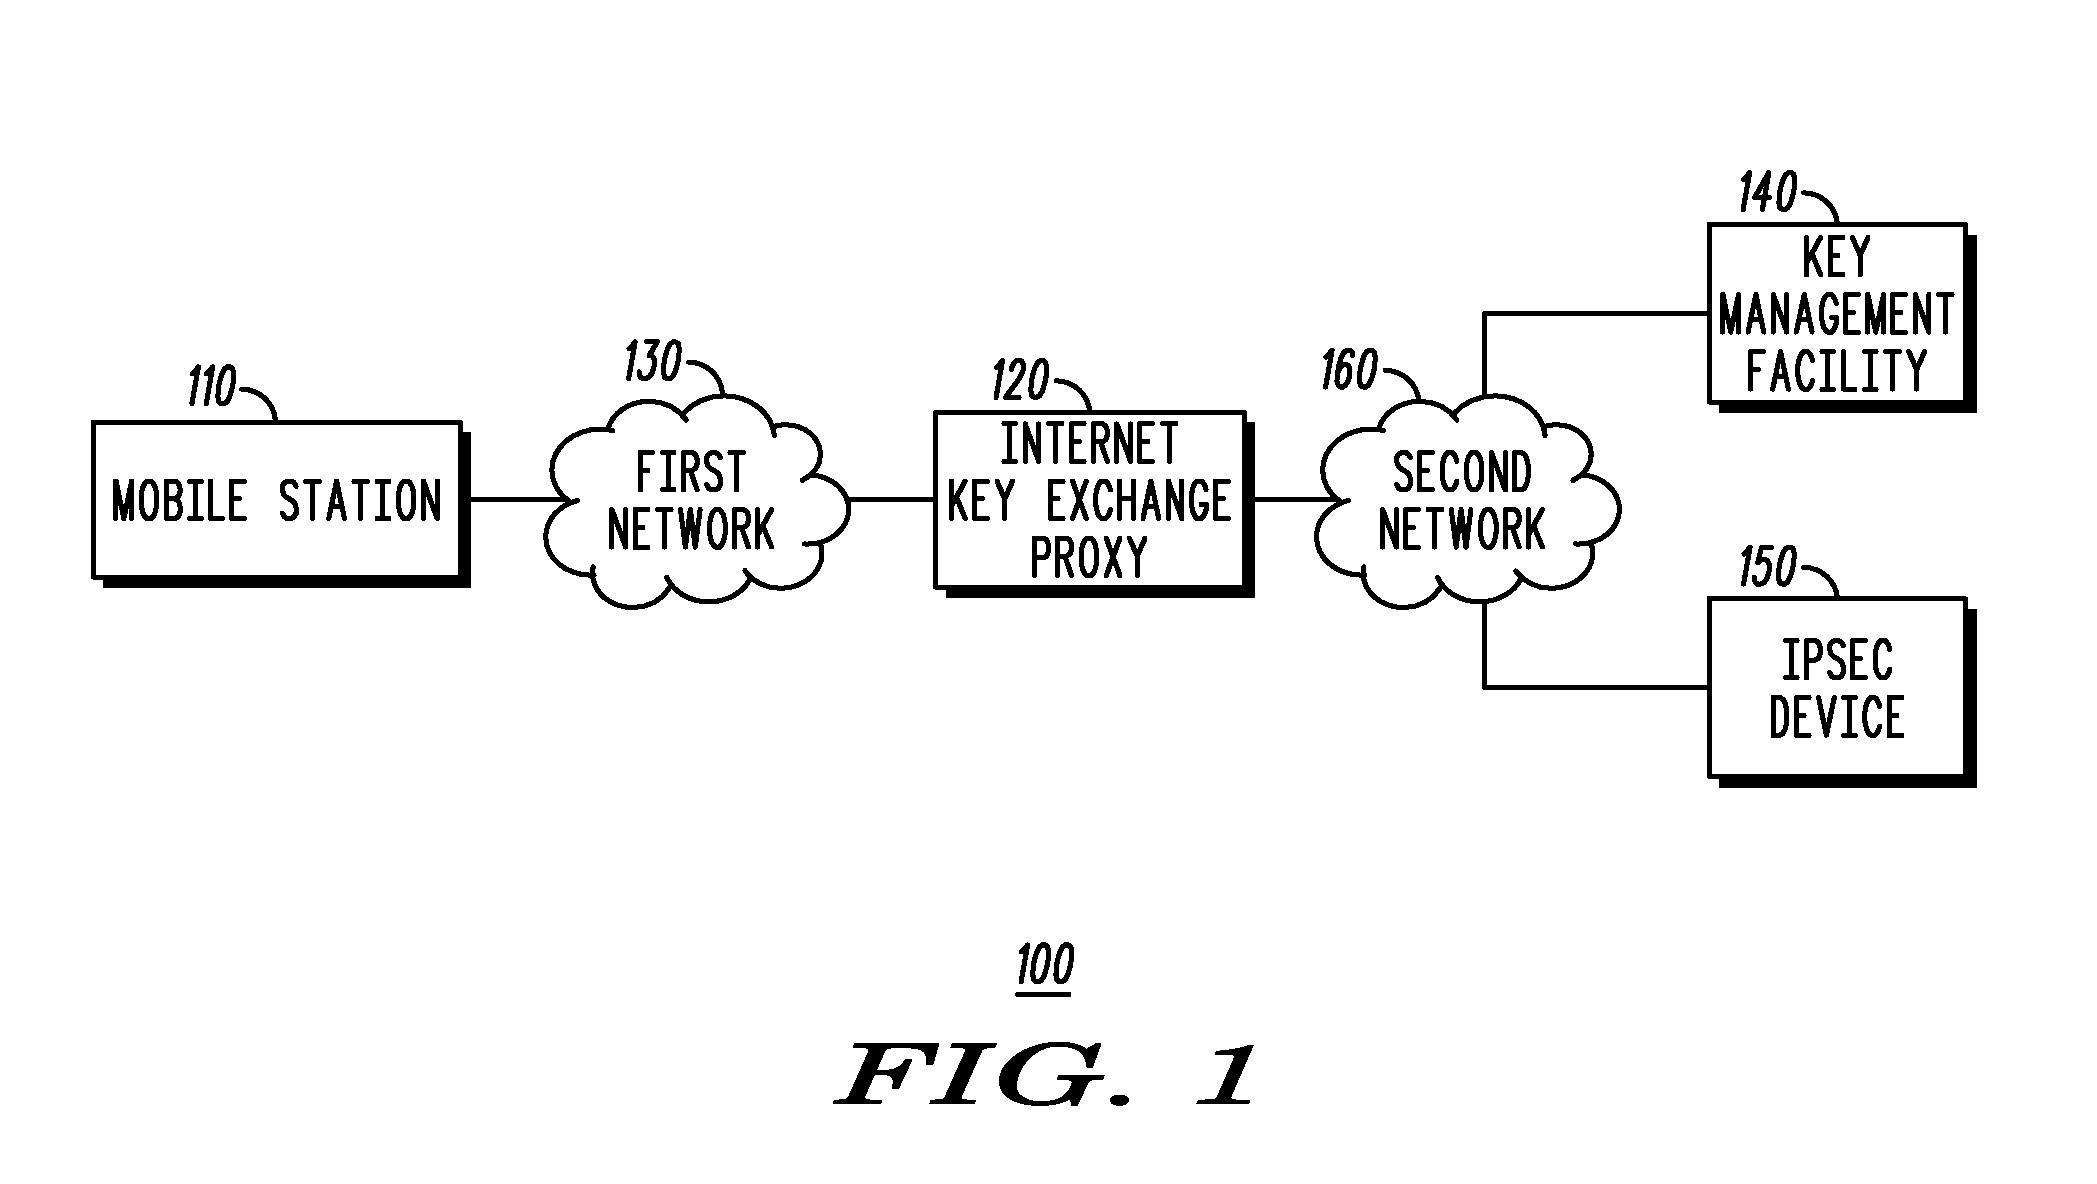 Method and system for using a key management facility to negotiate a security association via an internet key exchange on behalf of another device